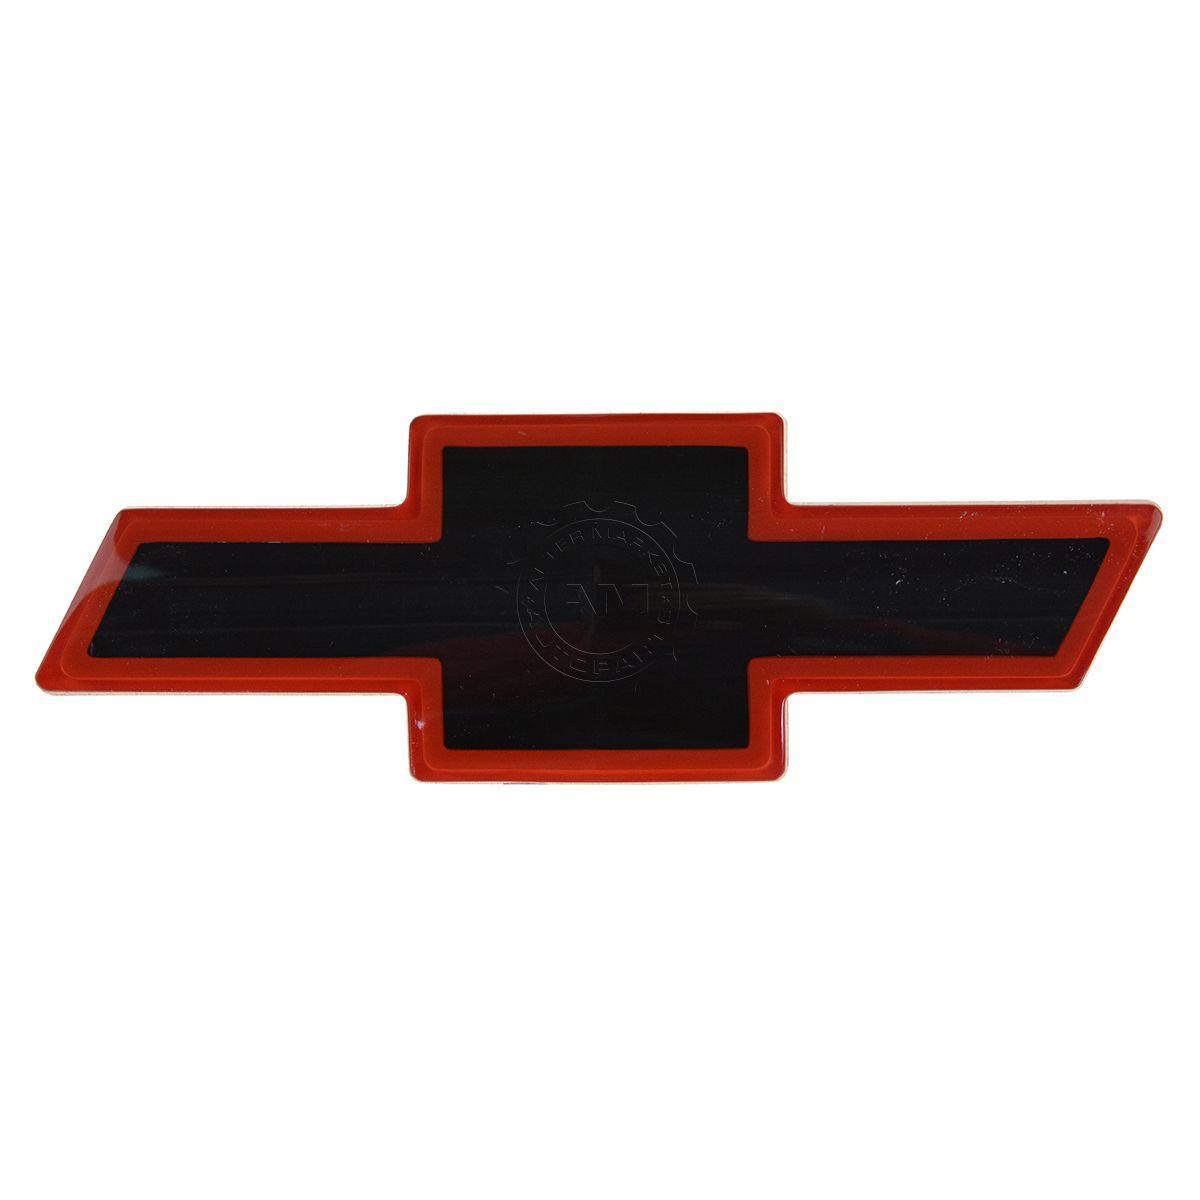 Red Bowtie Logo - OEM 12543000 Grille Mounted Black & Red Bowtie Emblem for Chevy | eBay